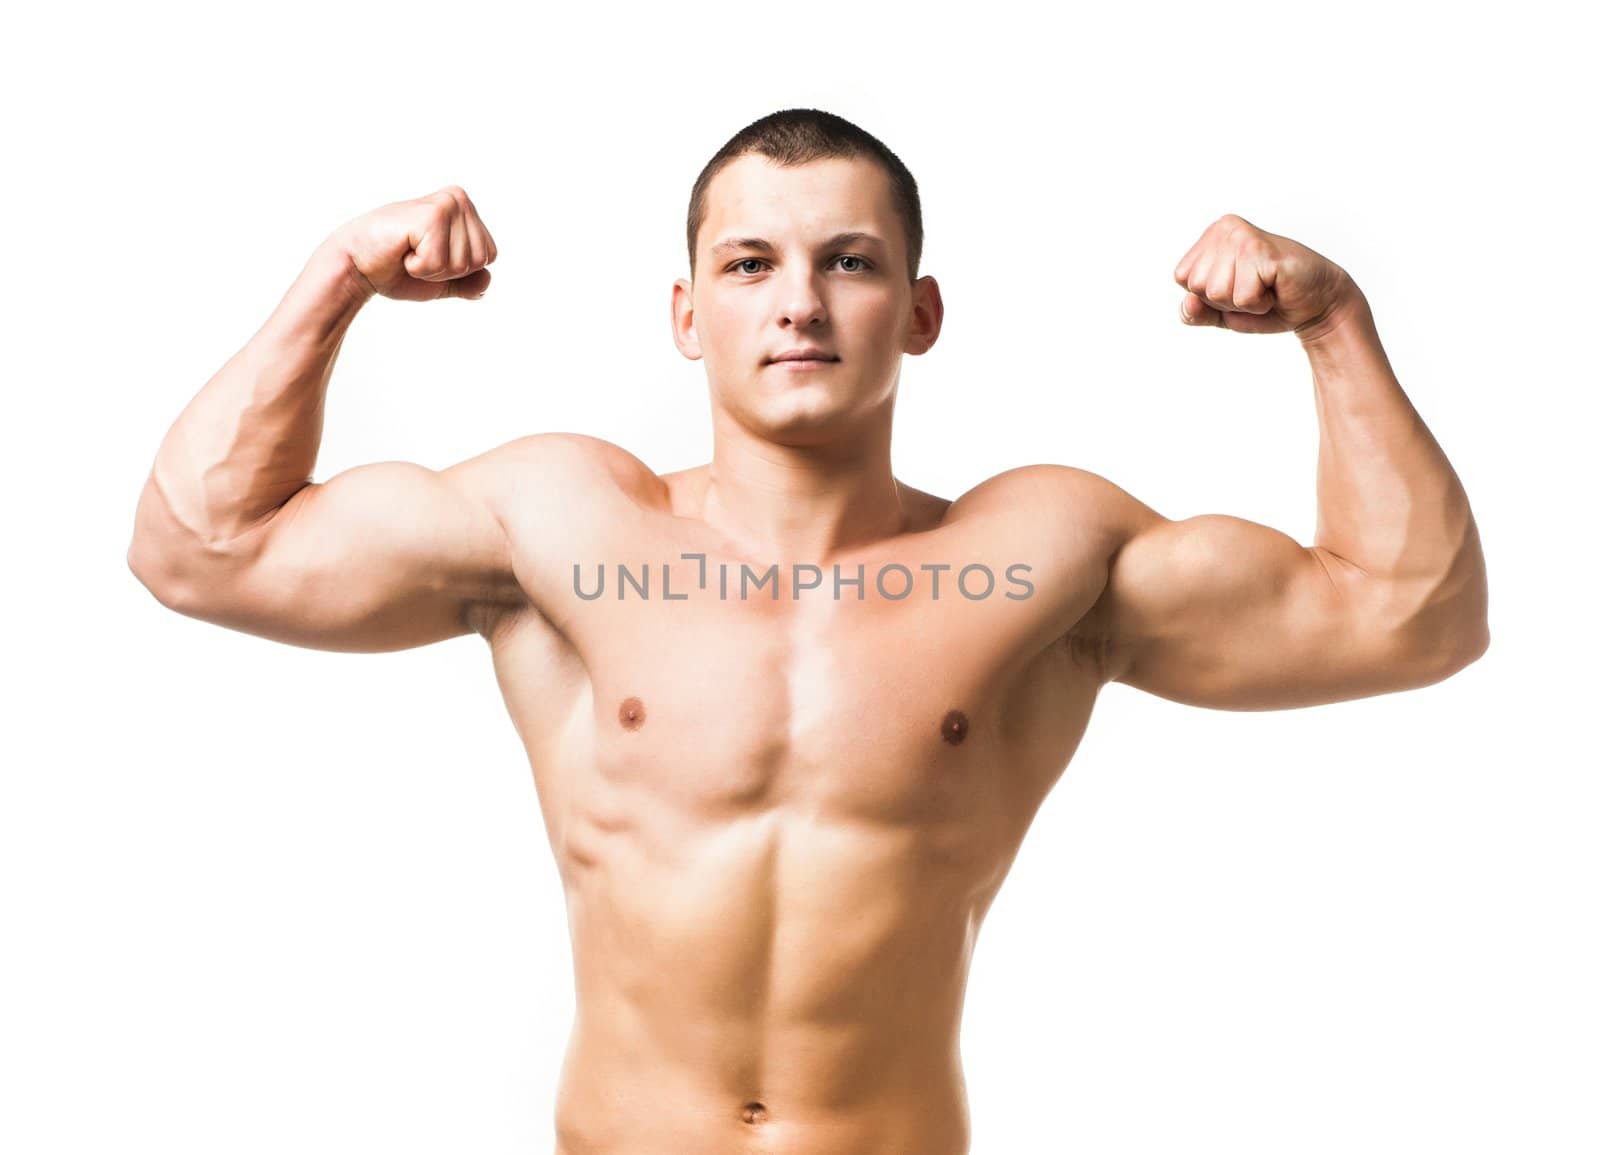 Handsome muscular man isolated on white background